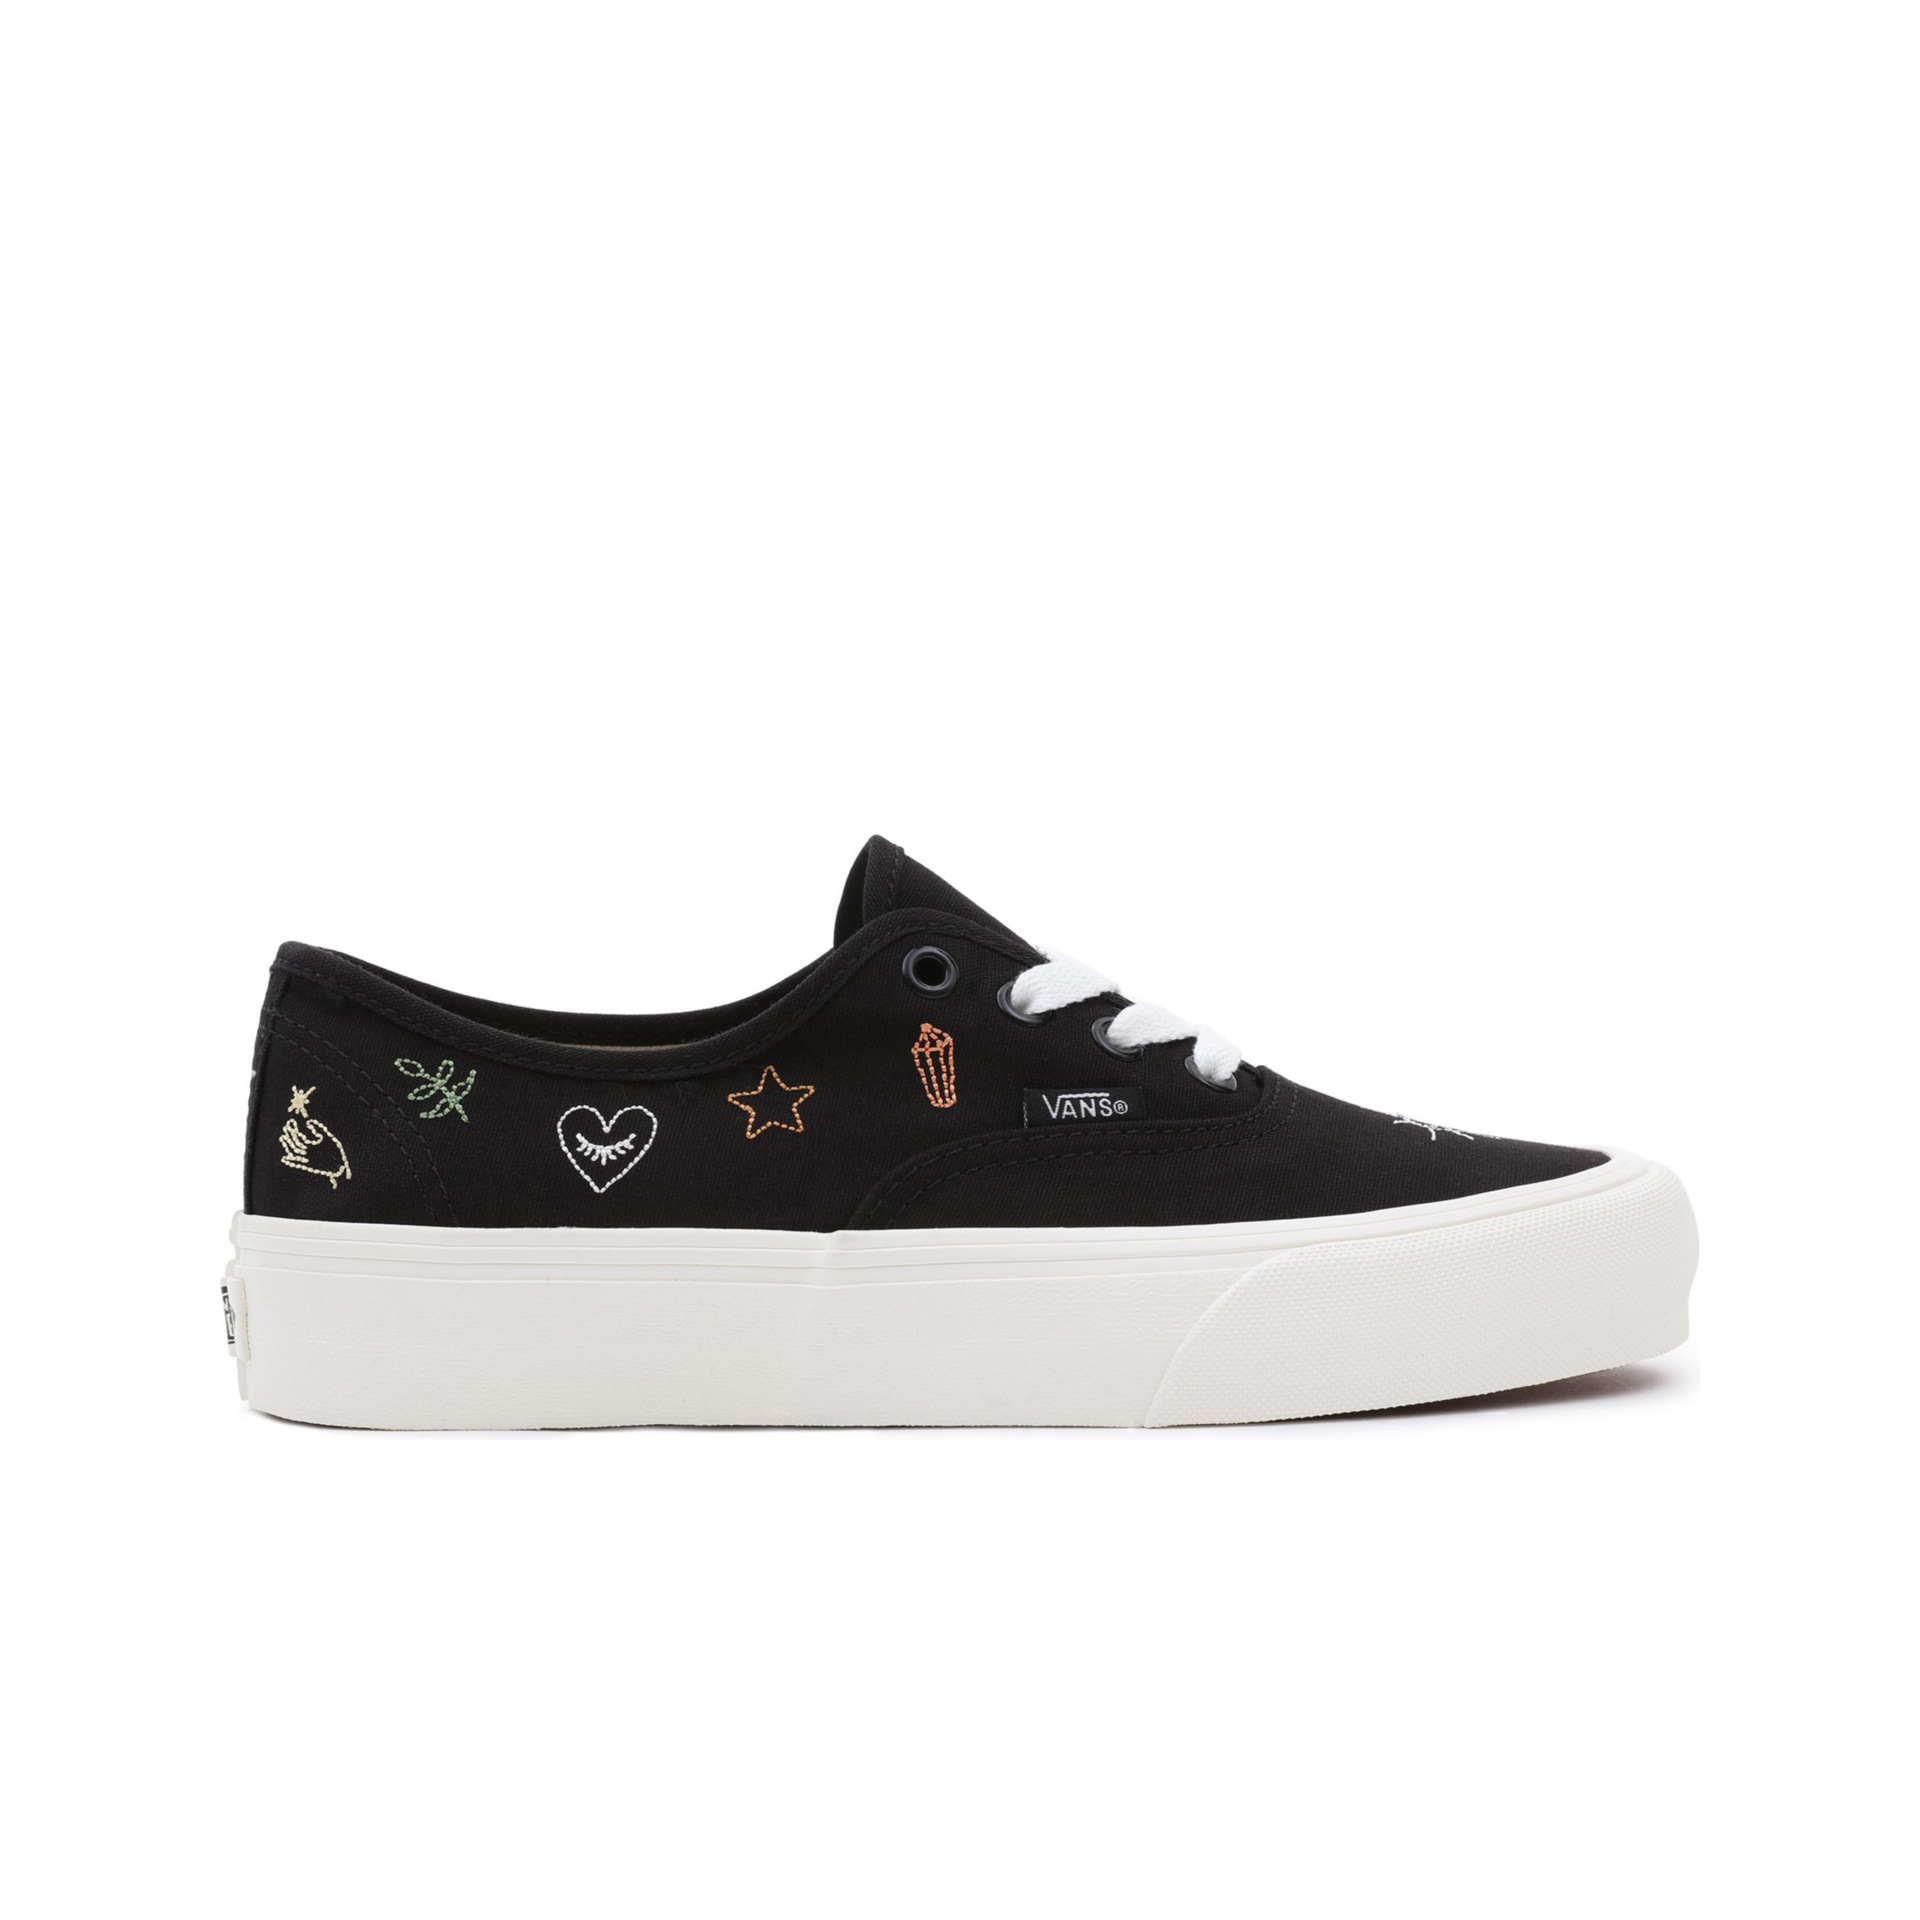 Vans Zapatillas Mujer Authentic VR3 lateral exterior